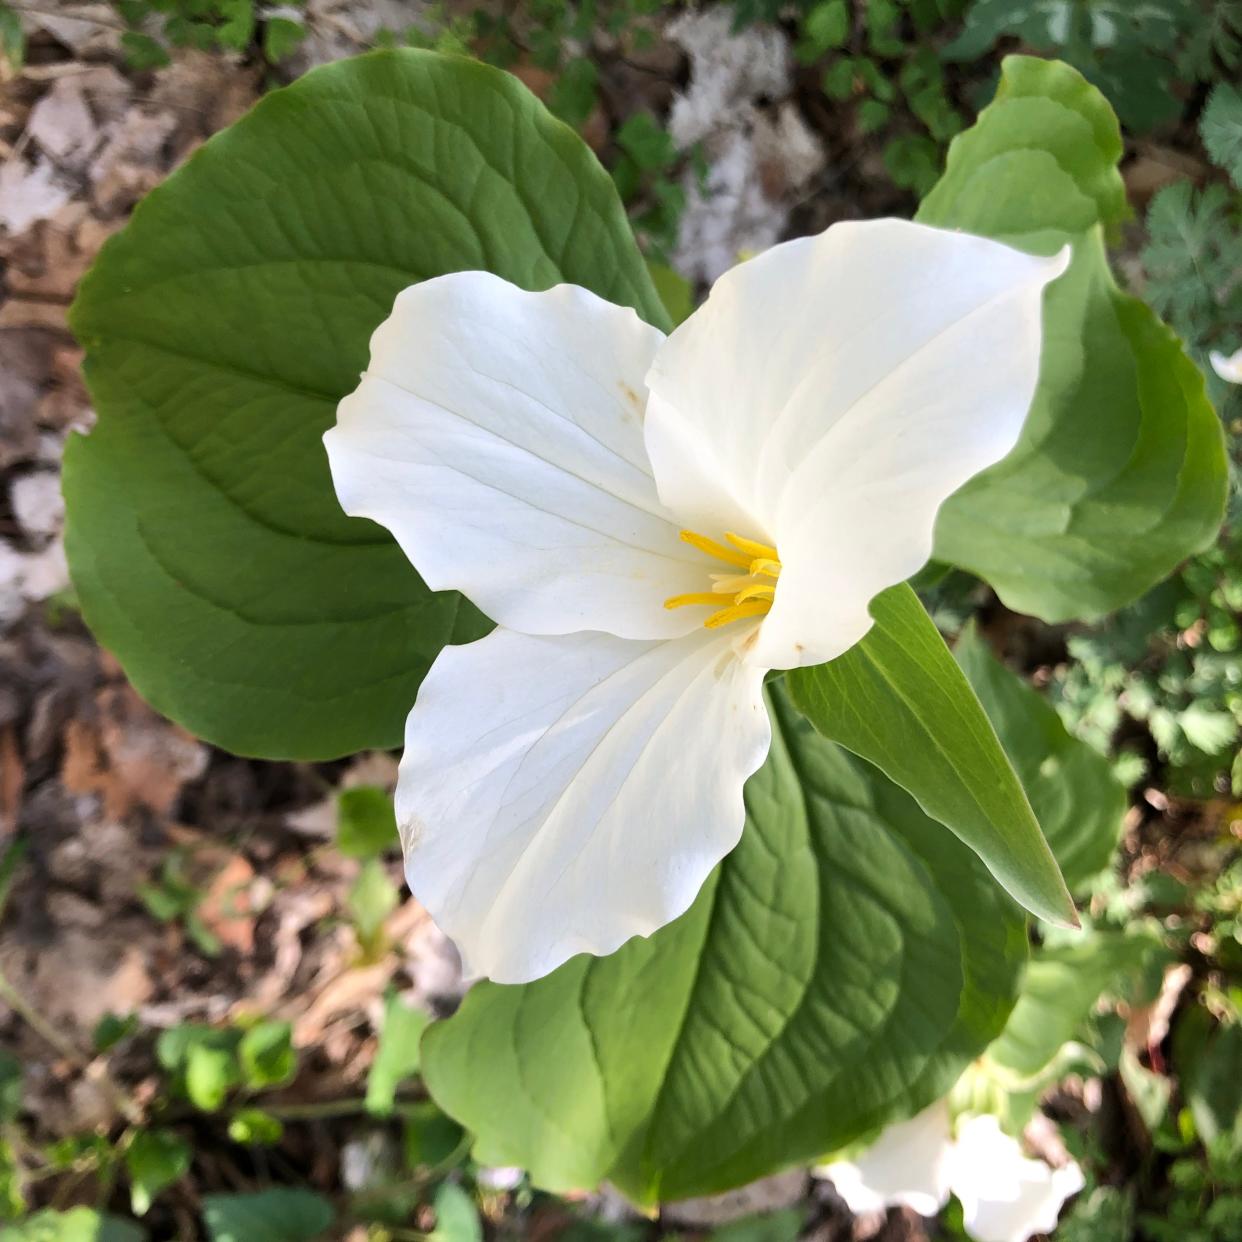 Large-flowered white trilliums are in full bloom at Trillium Ravine Nature Preserve in Niles and at other local nature preserves.